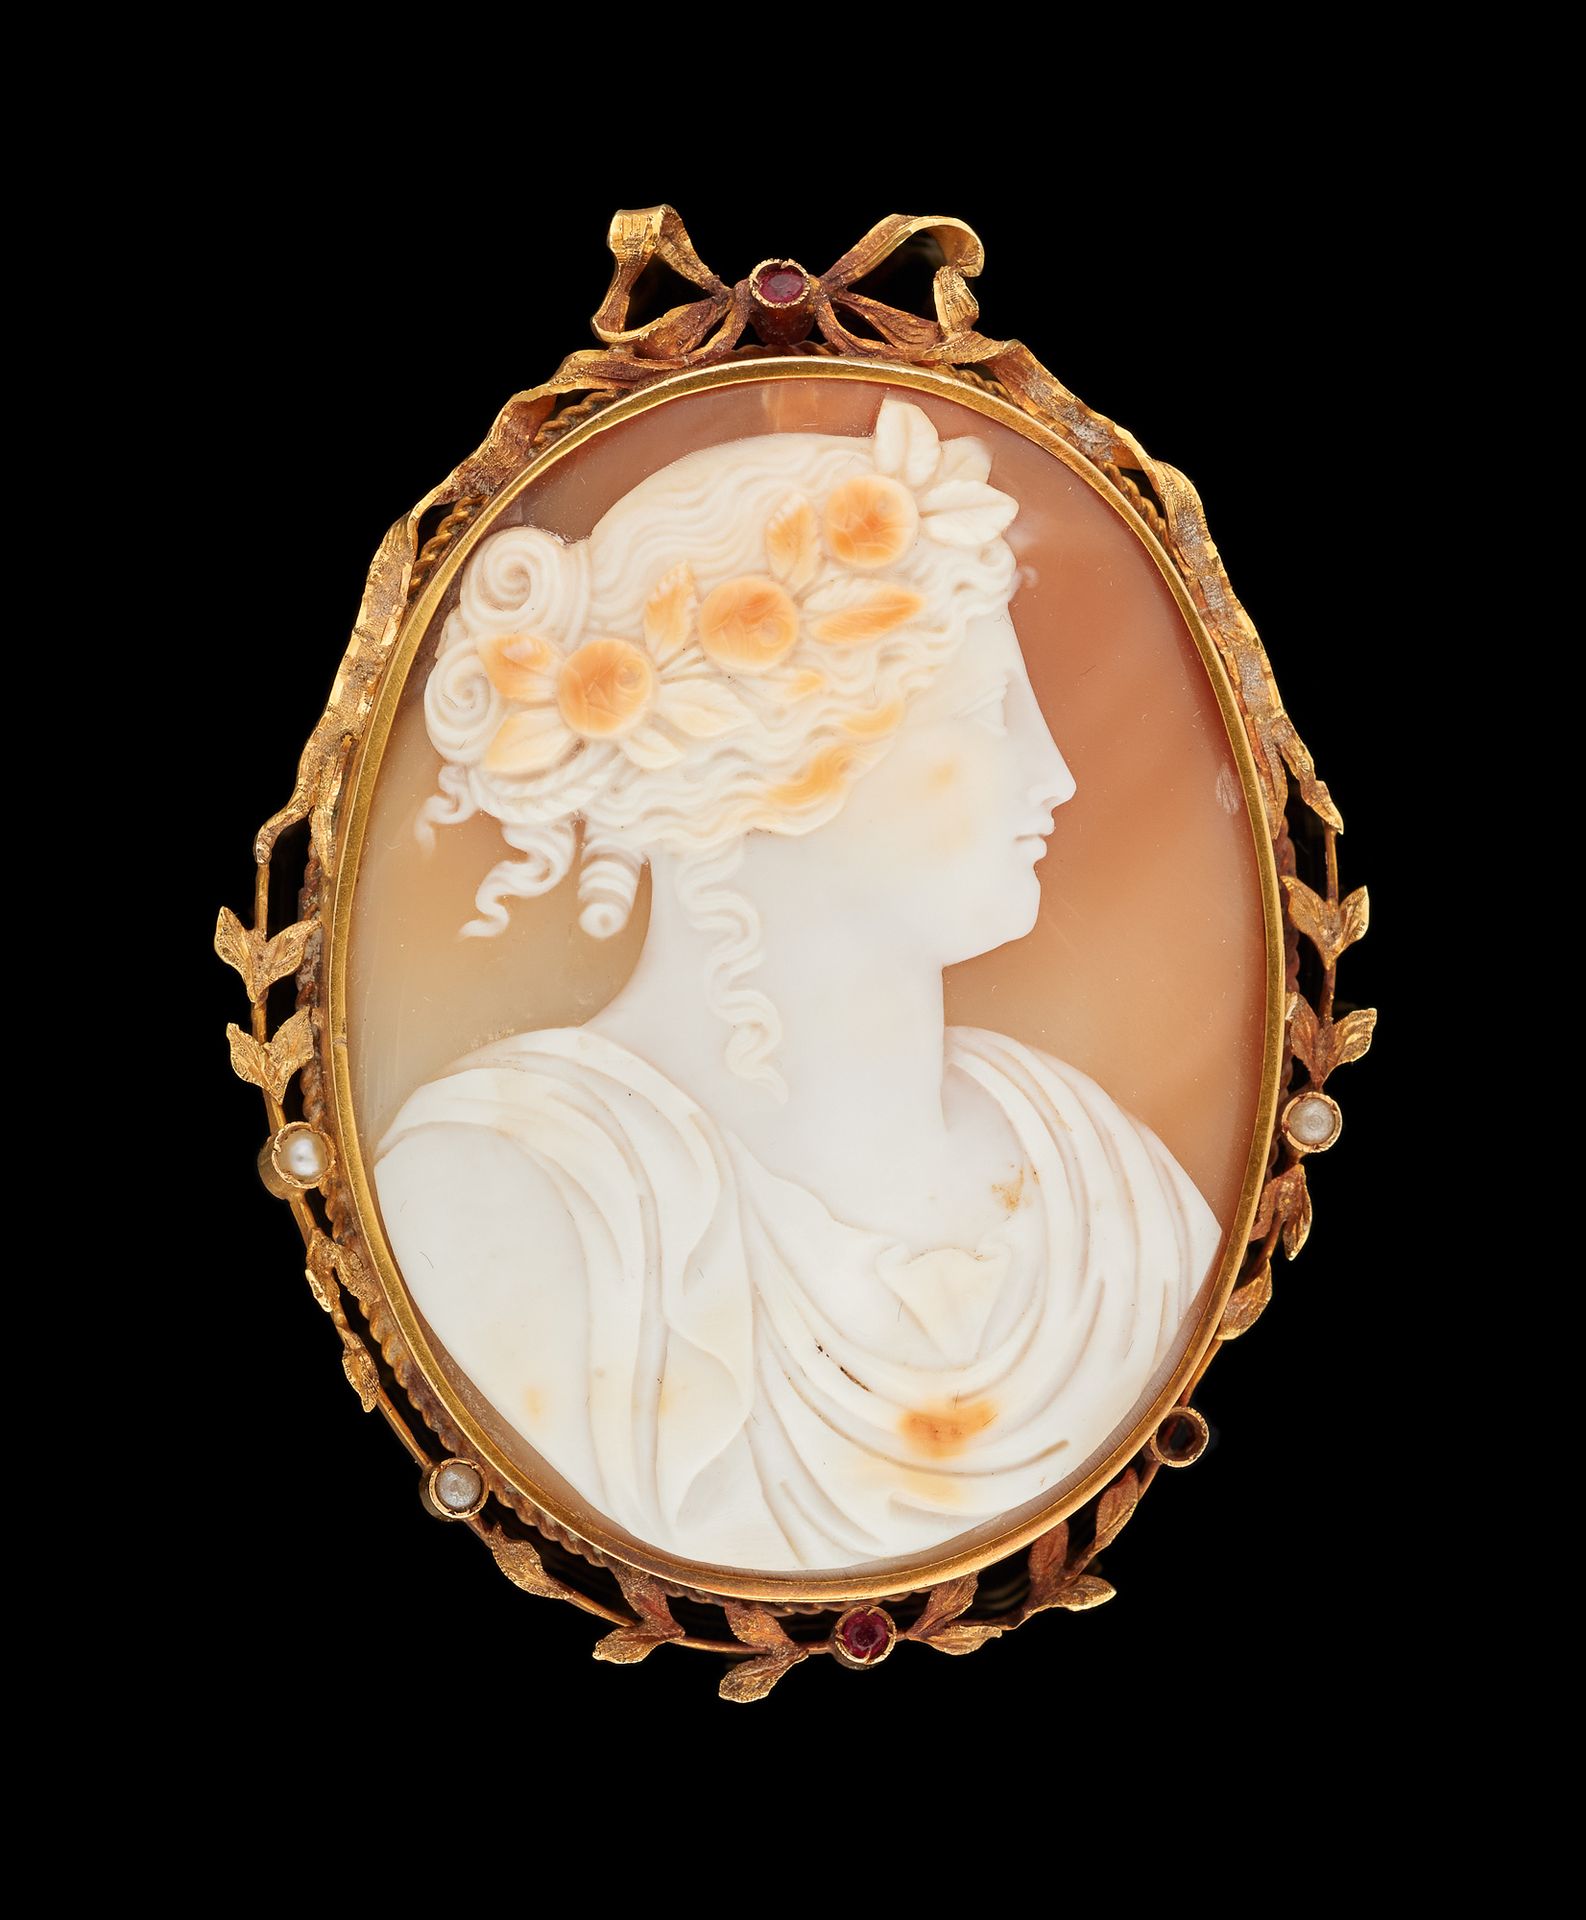 Joaillerie. Jewel: Cameo representing a young woman. 

(a small pearl is missing&hellip;